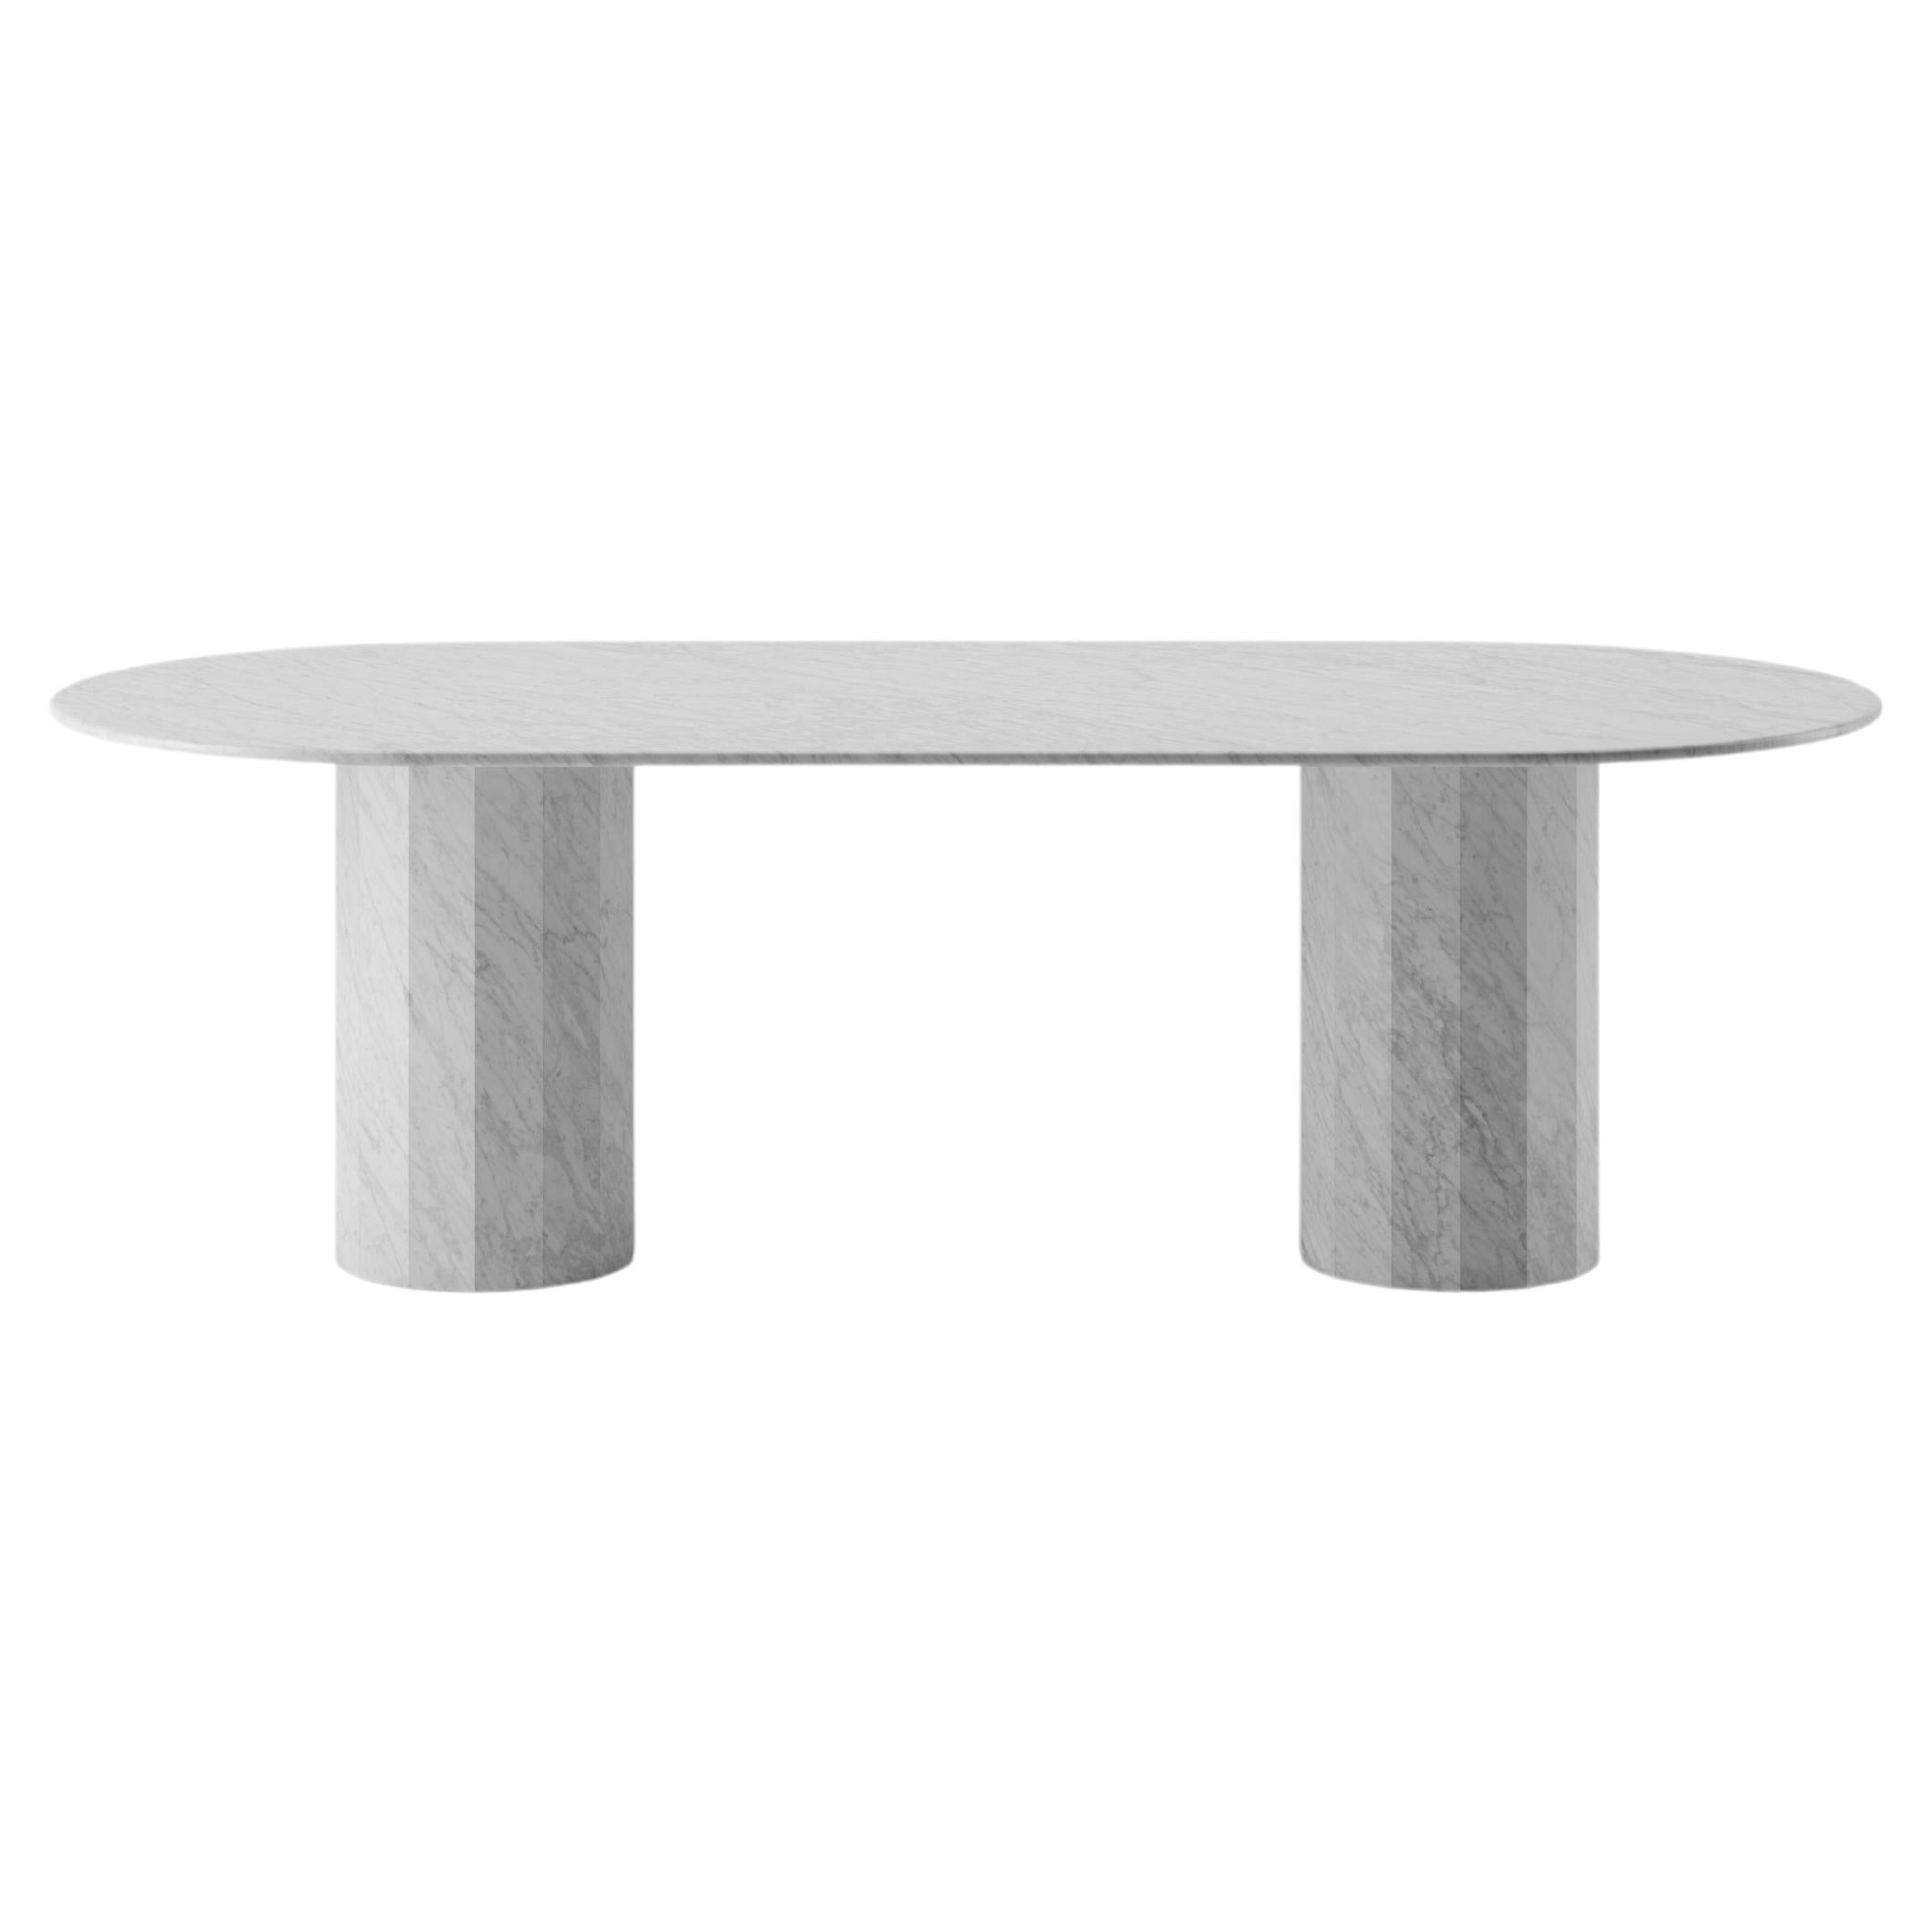 Ashby Oval Dining Table in Honed Bianco Carrara Marble